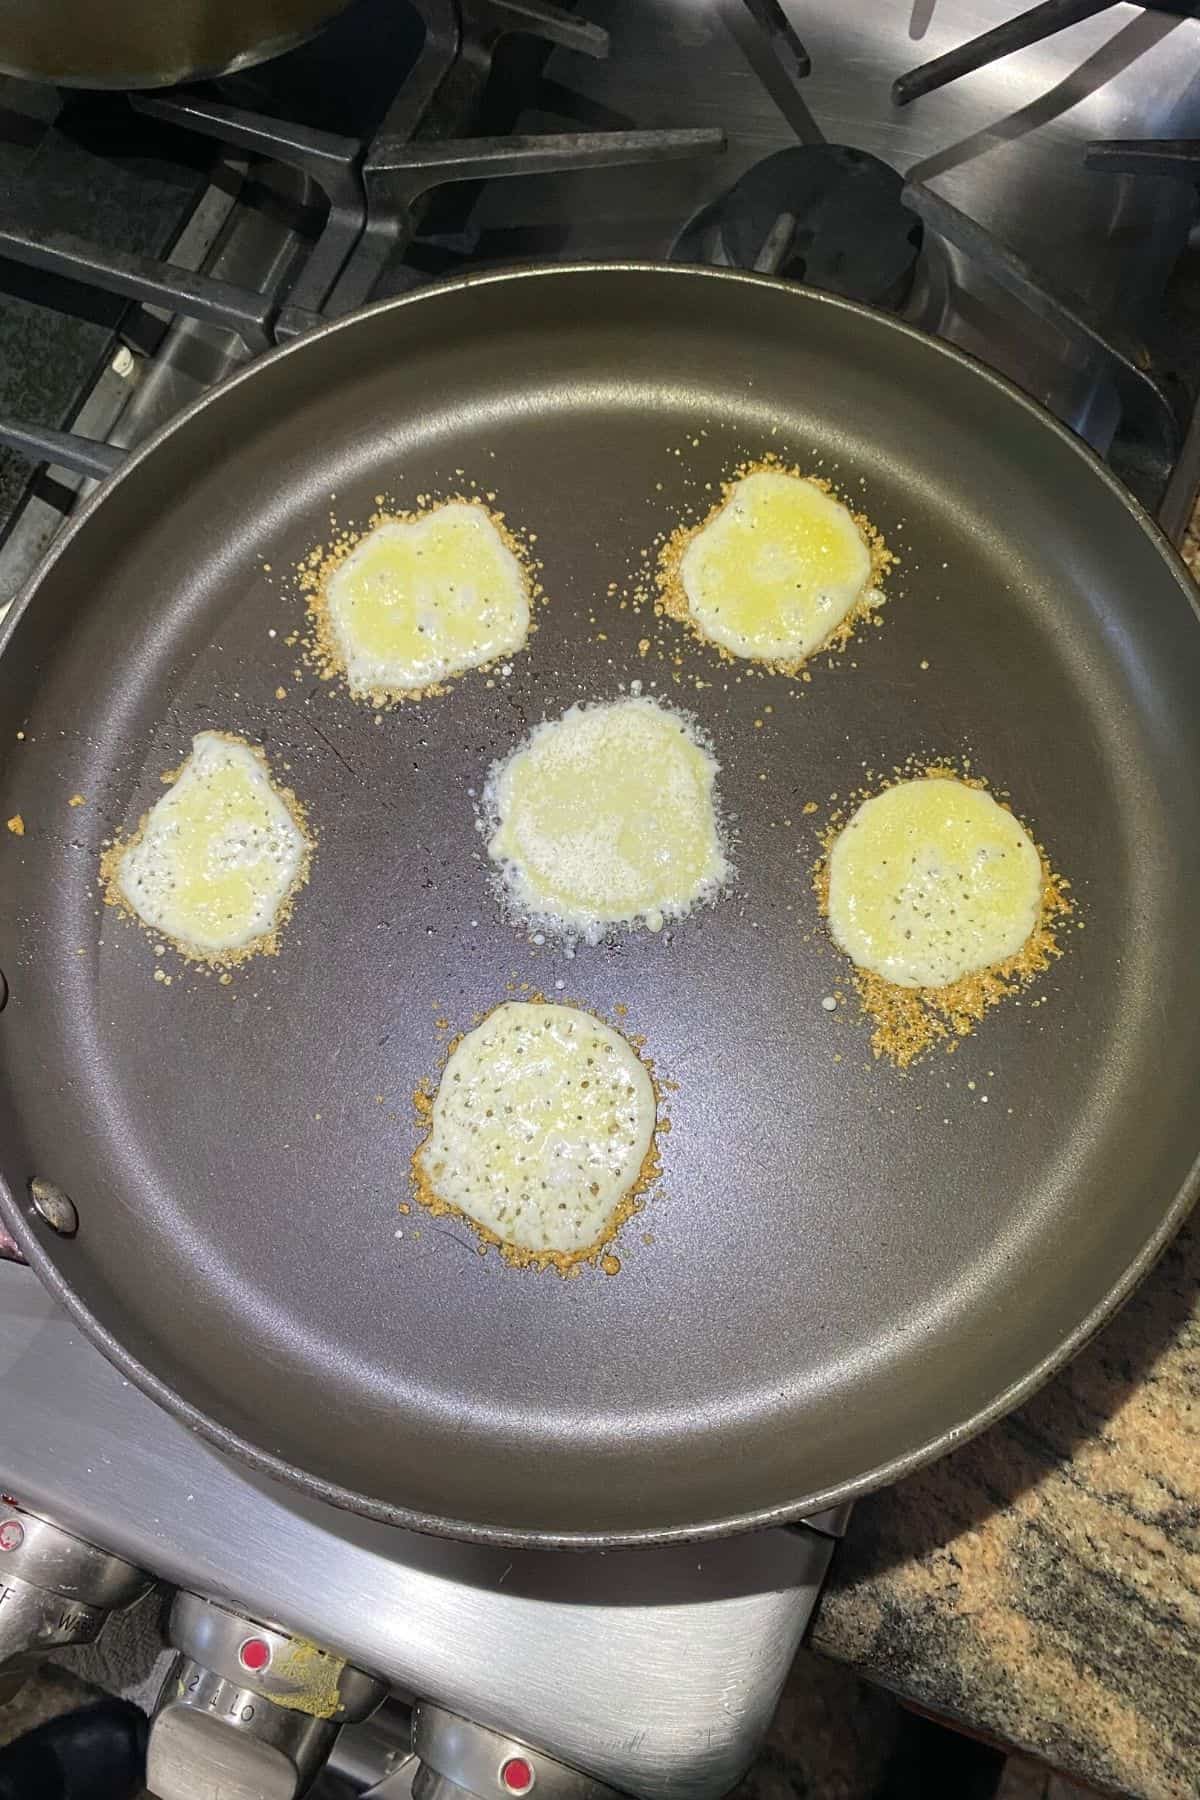 Parmesan cheese being fried onto a nonstick pan to make crisps